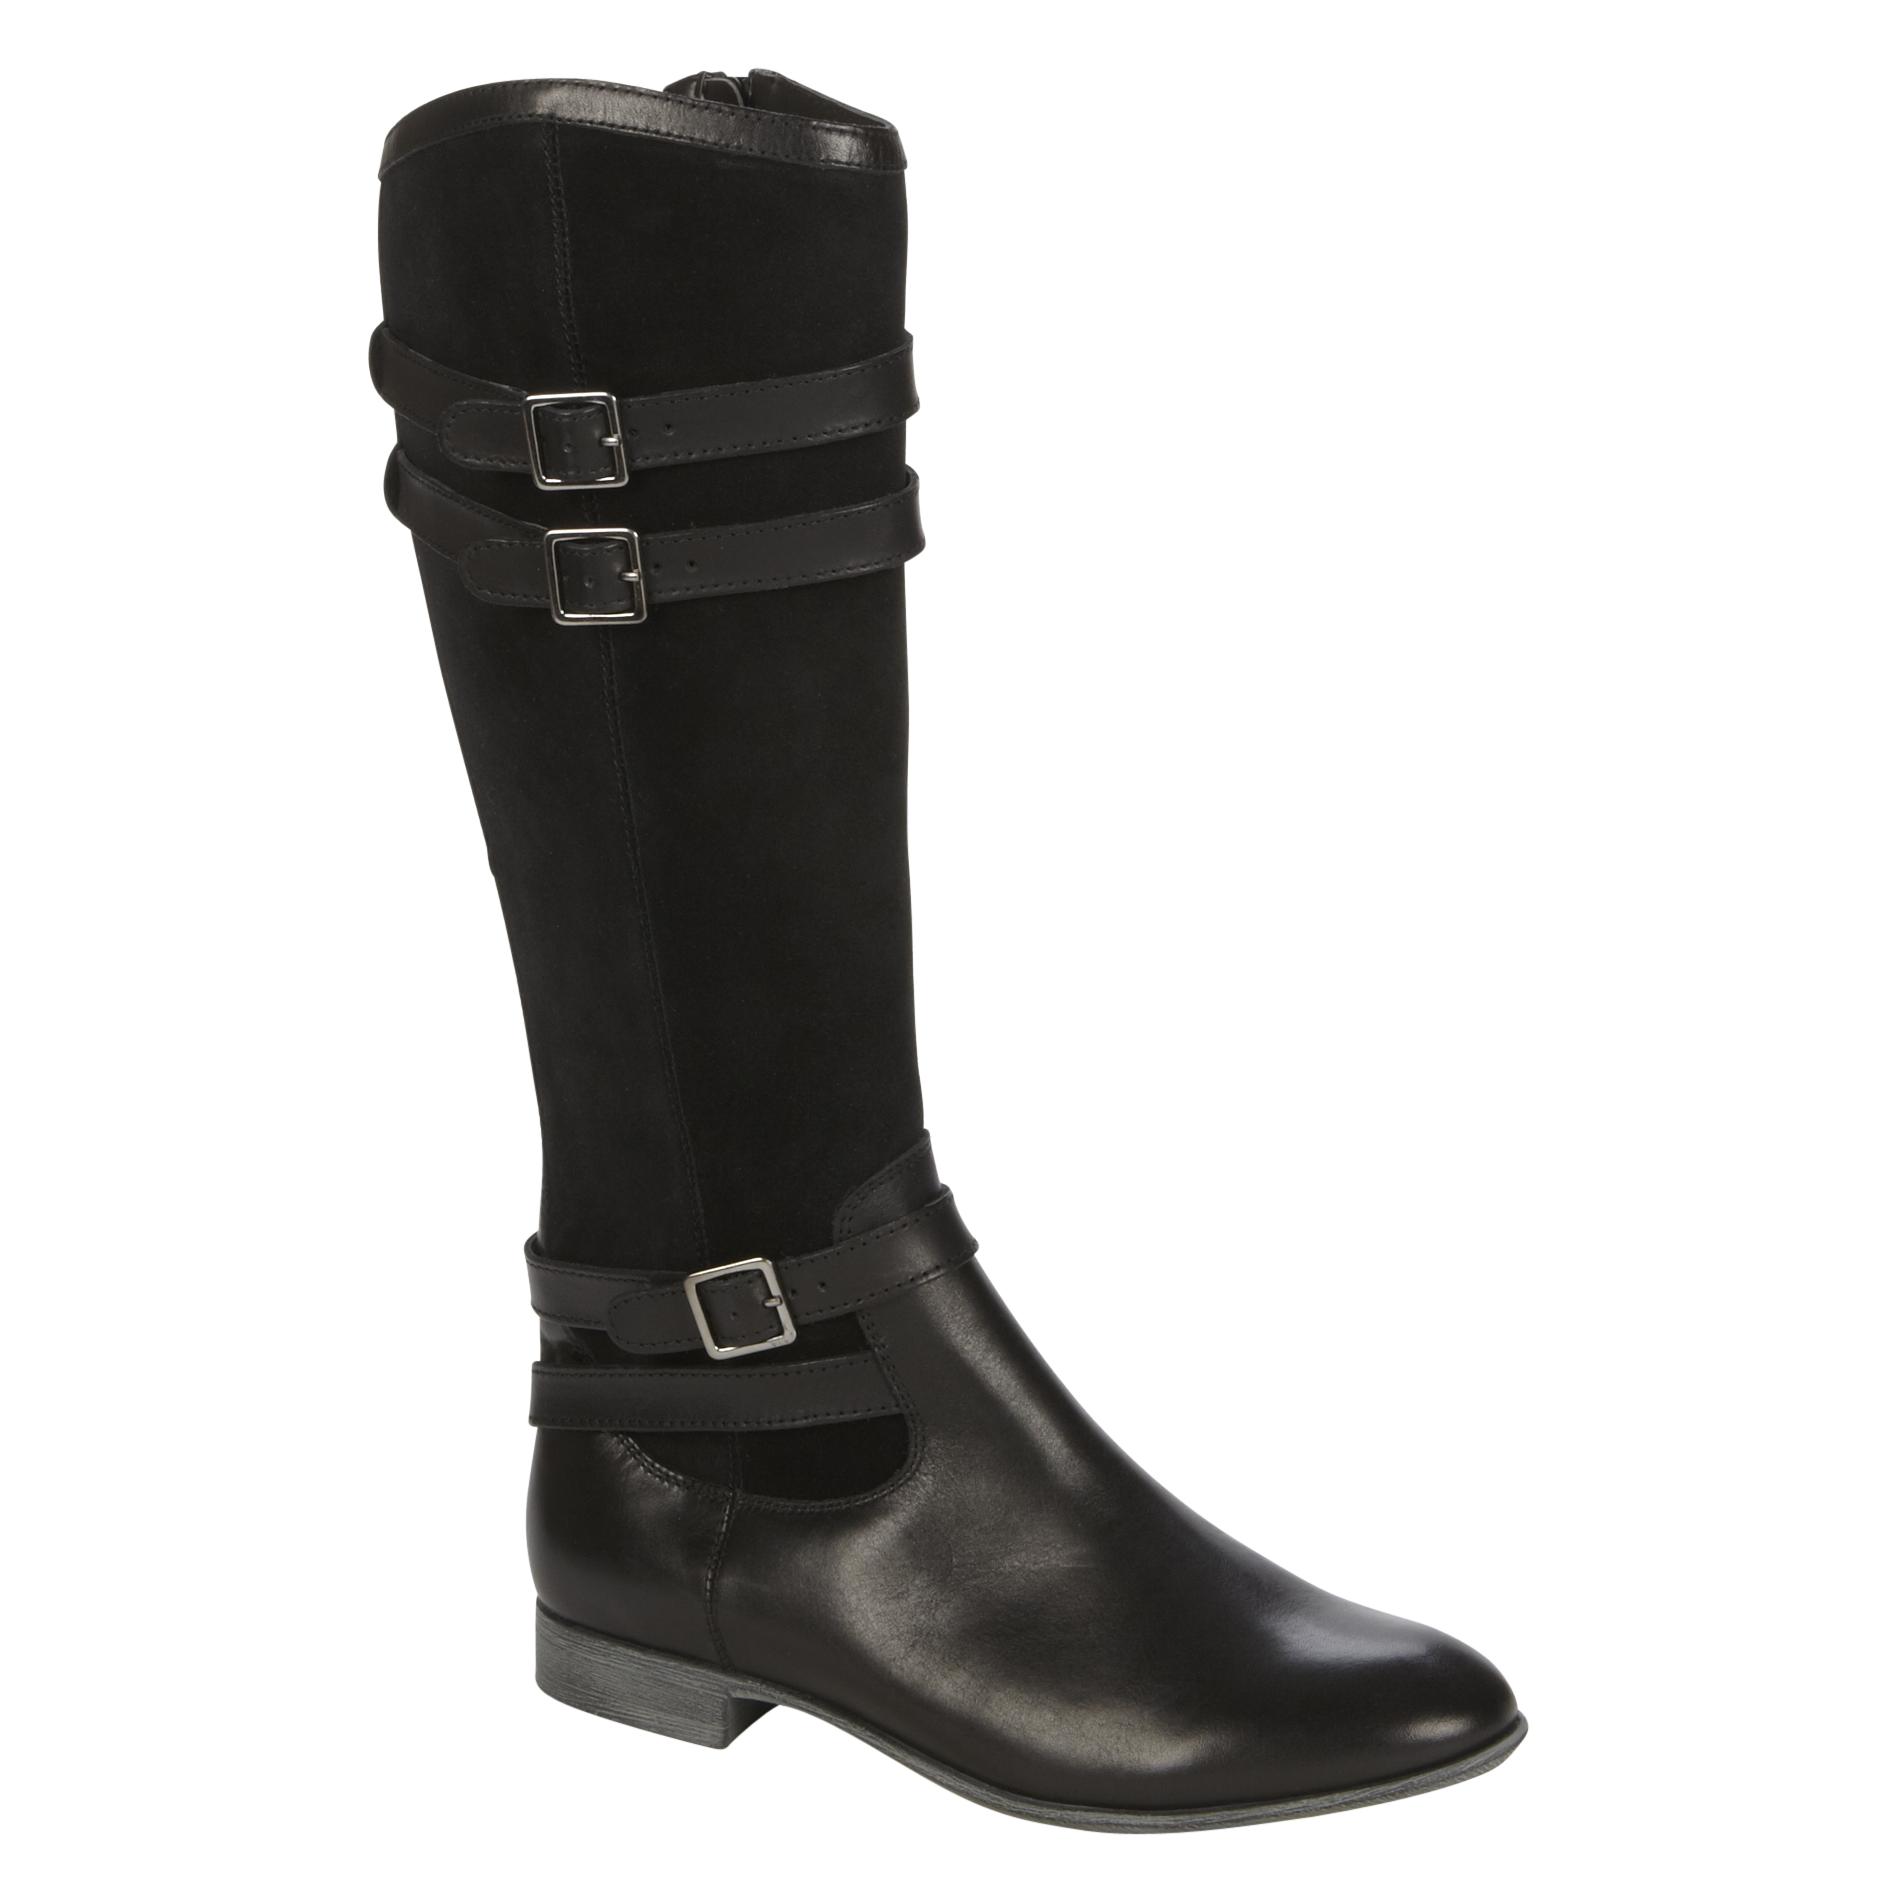 Go Max Women's Tall Weather Riding Boot Farland Medium and Wide Width - Black